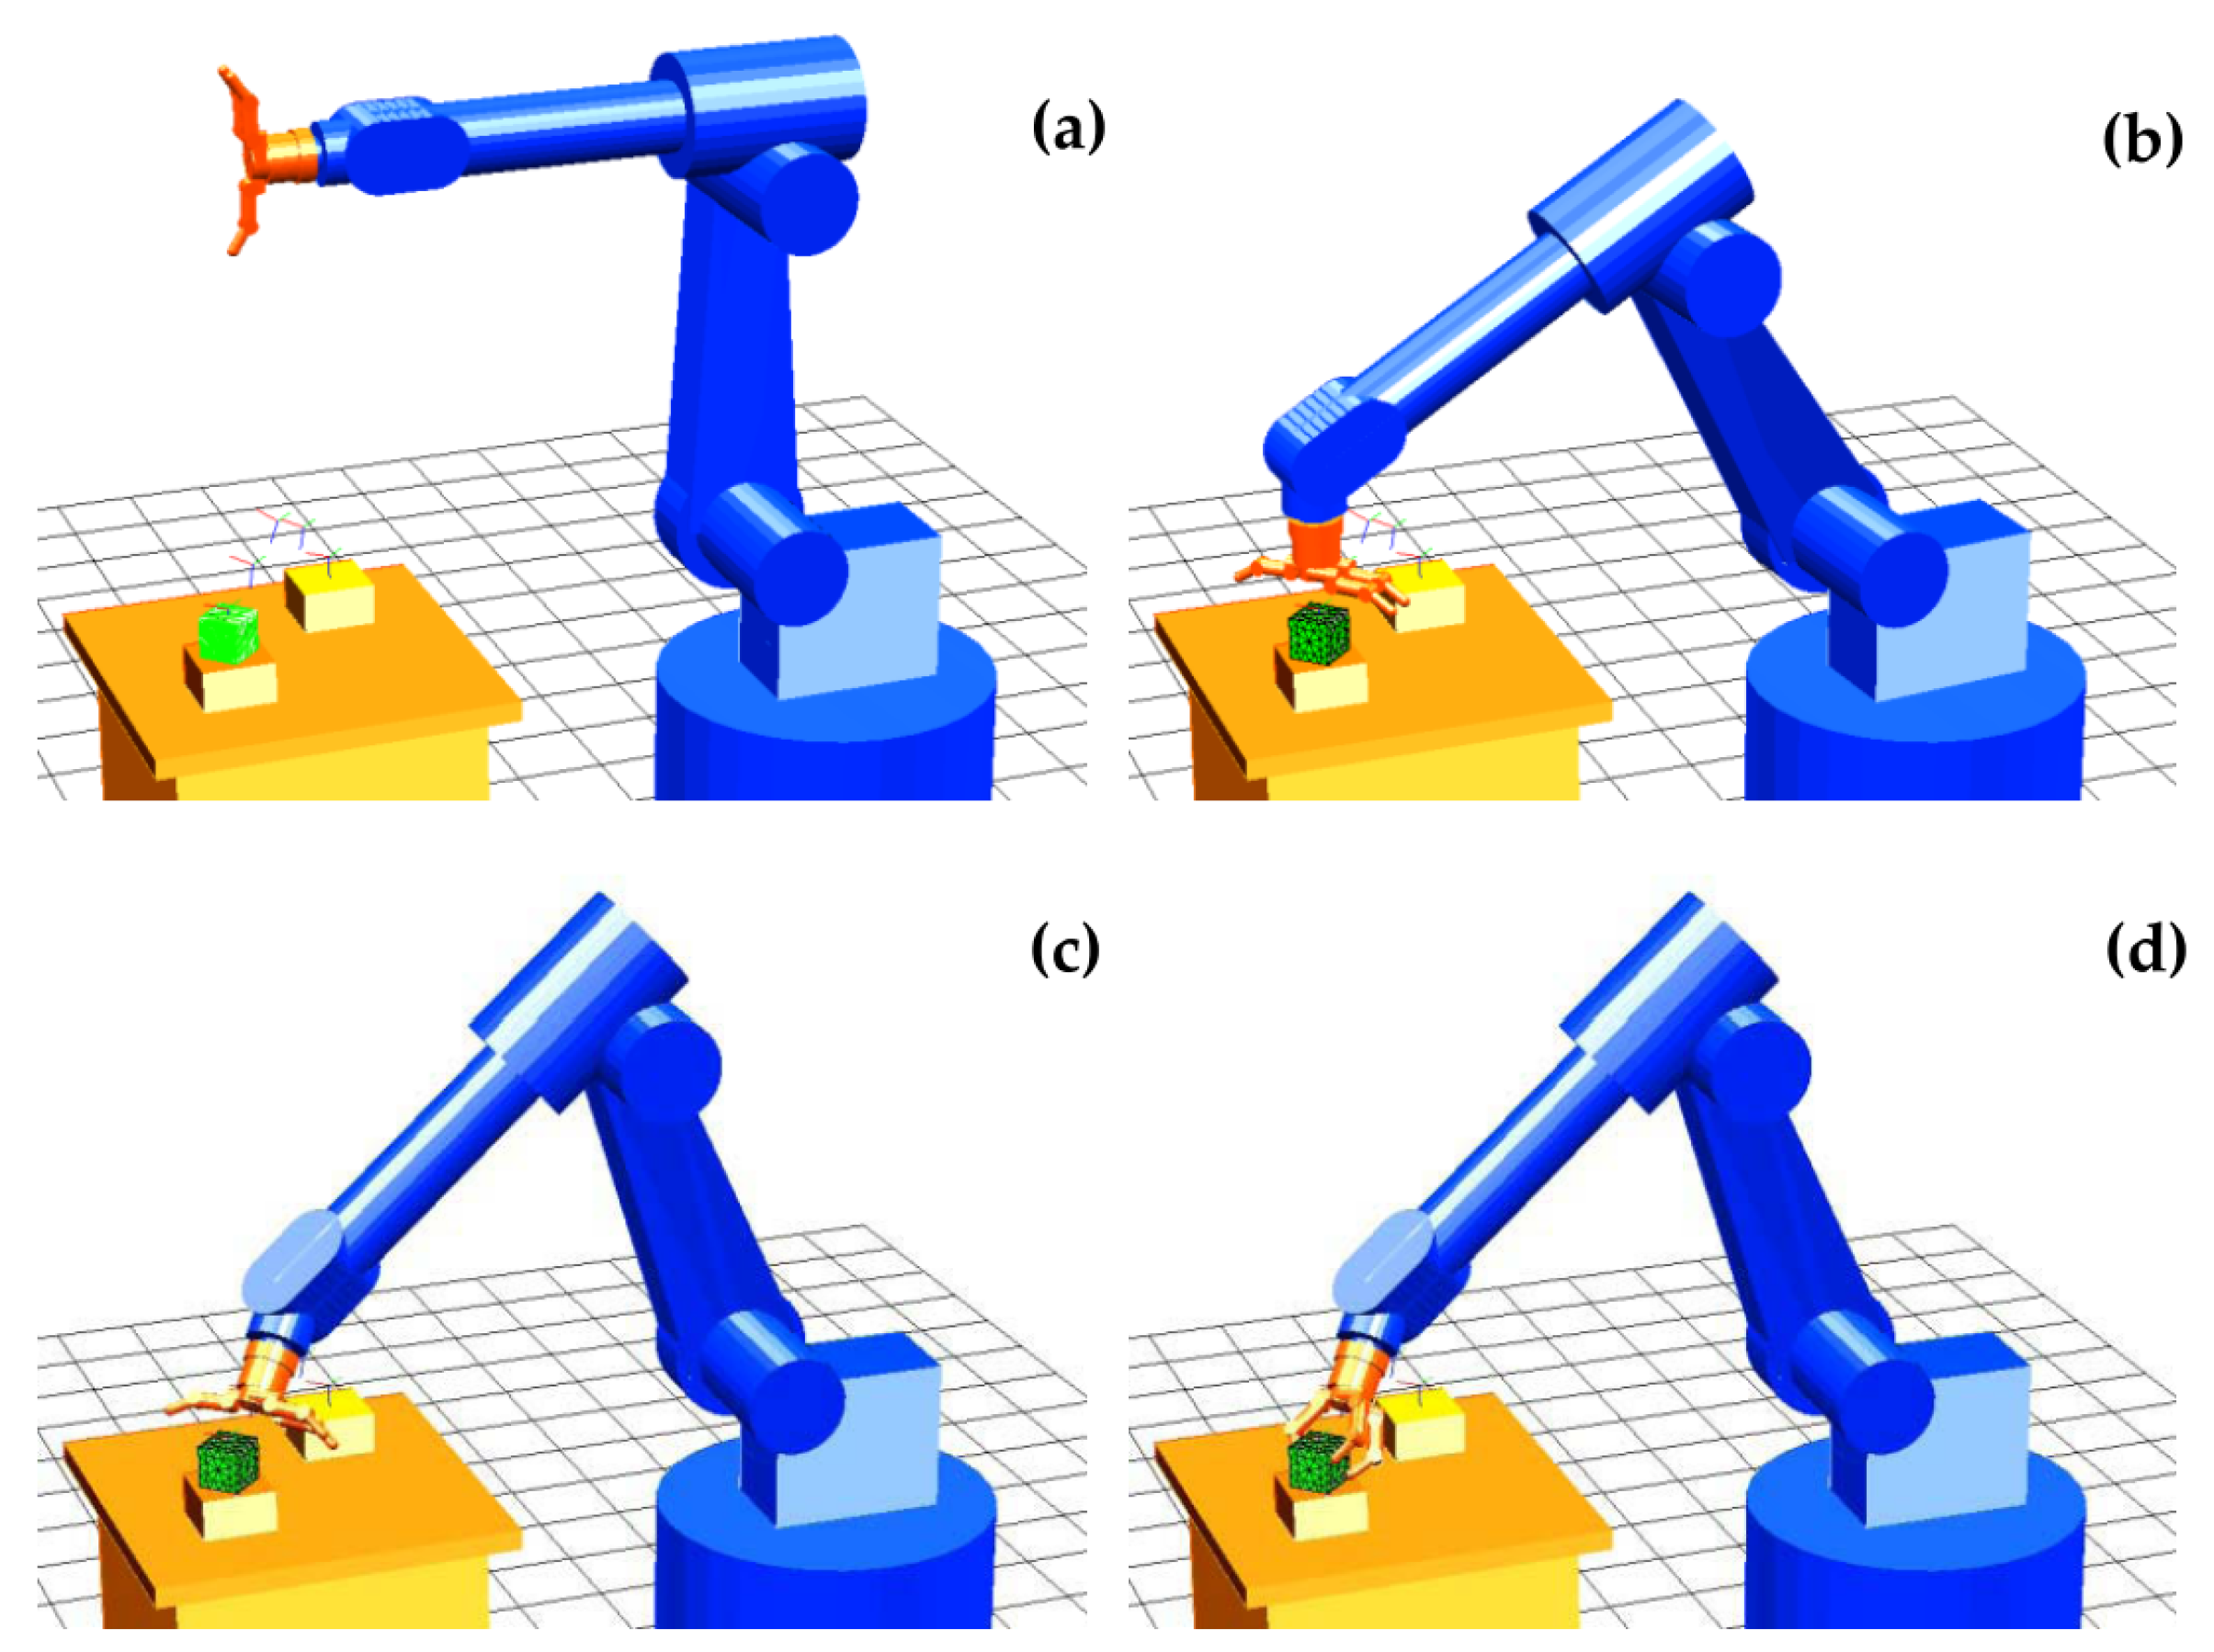 Applied Sciences | Free Full-Text | Grasp Planning Pipeline for Robust  Manipulation of 3D Deformable Objects with Industrial Robotic Hand + Arm  Systems